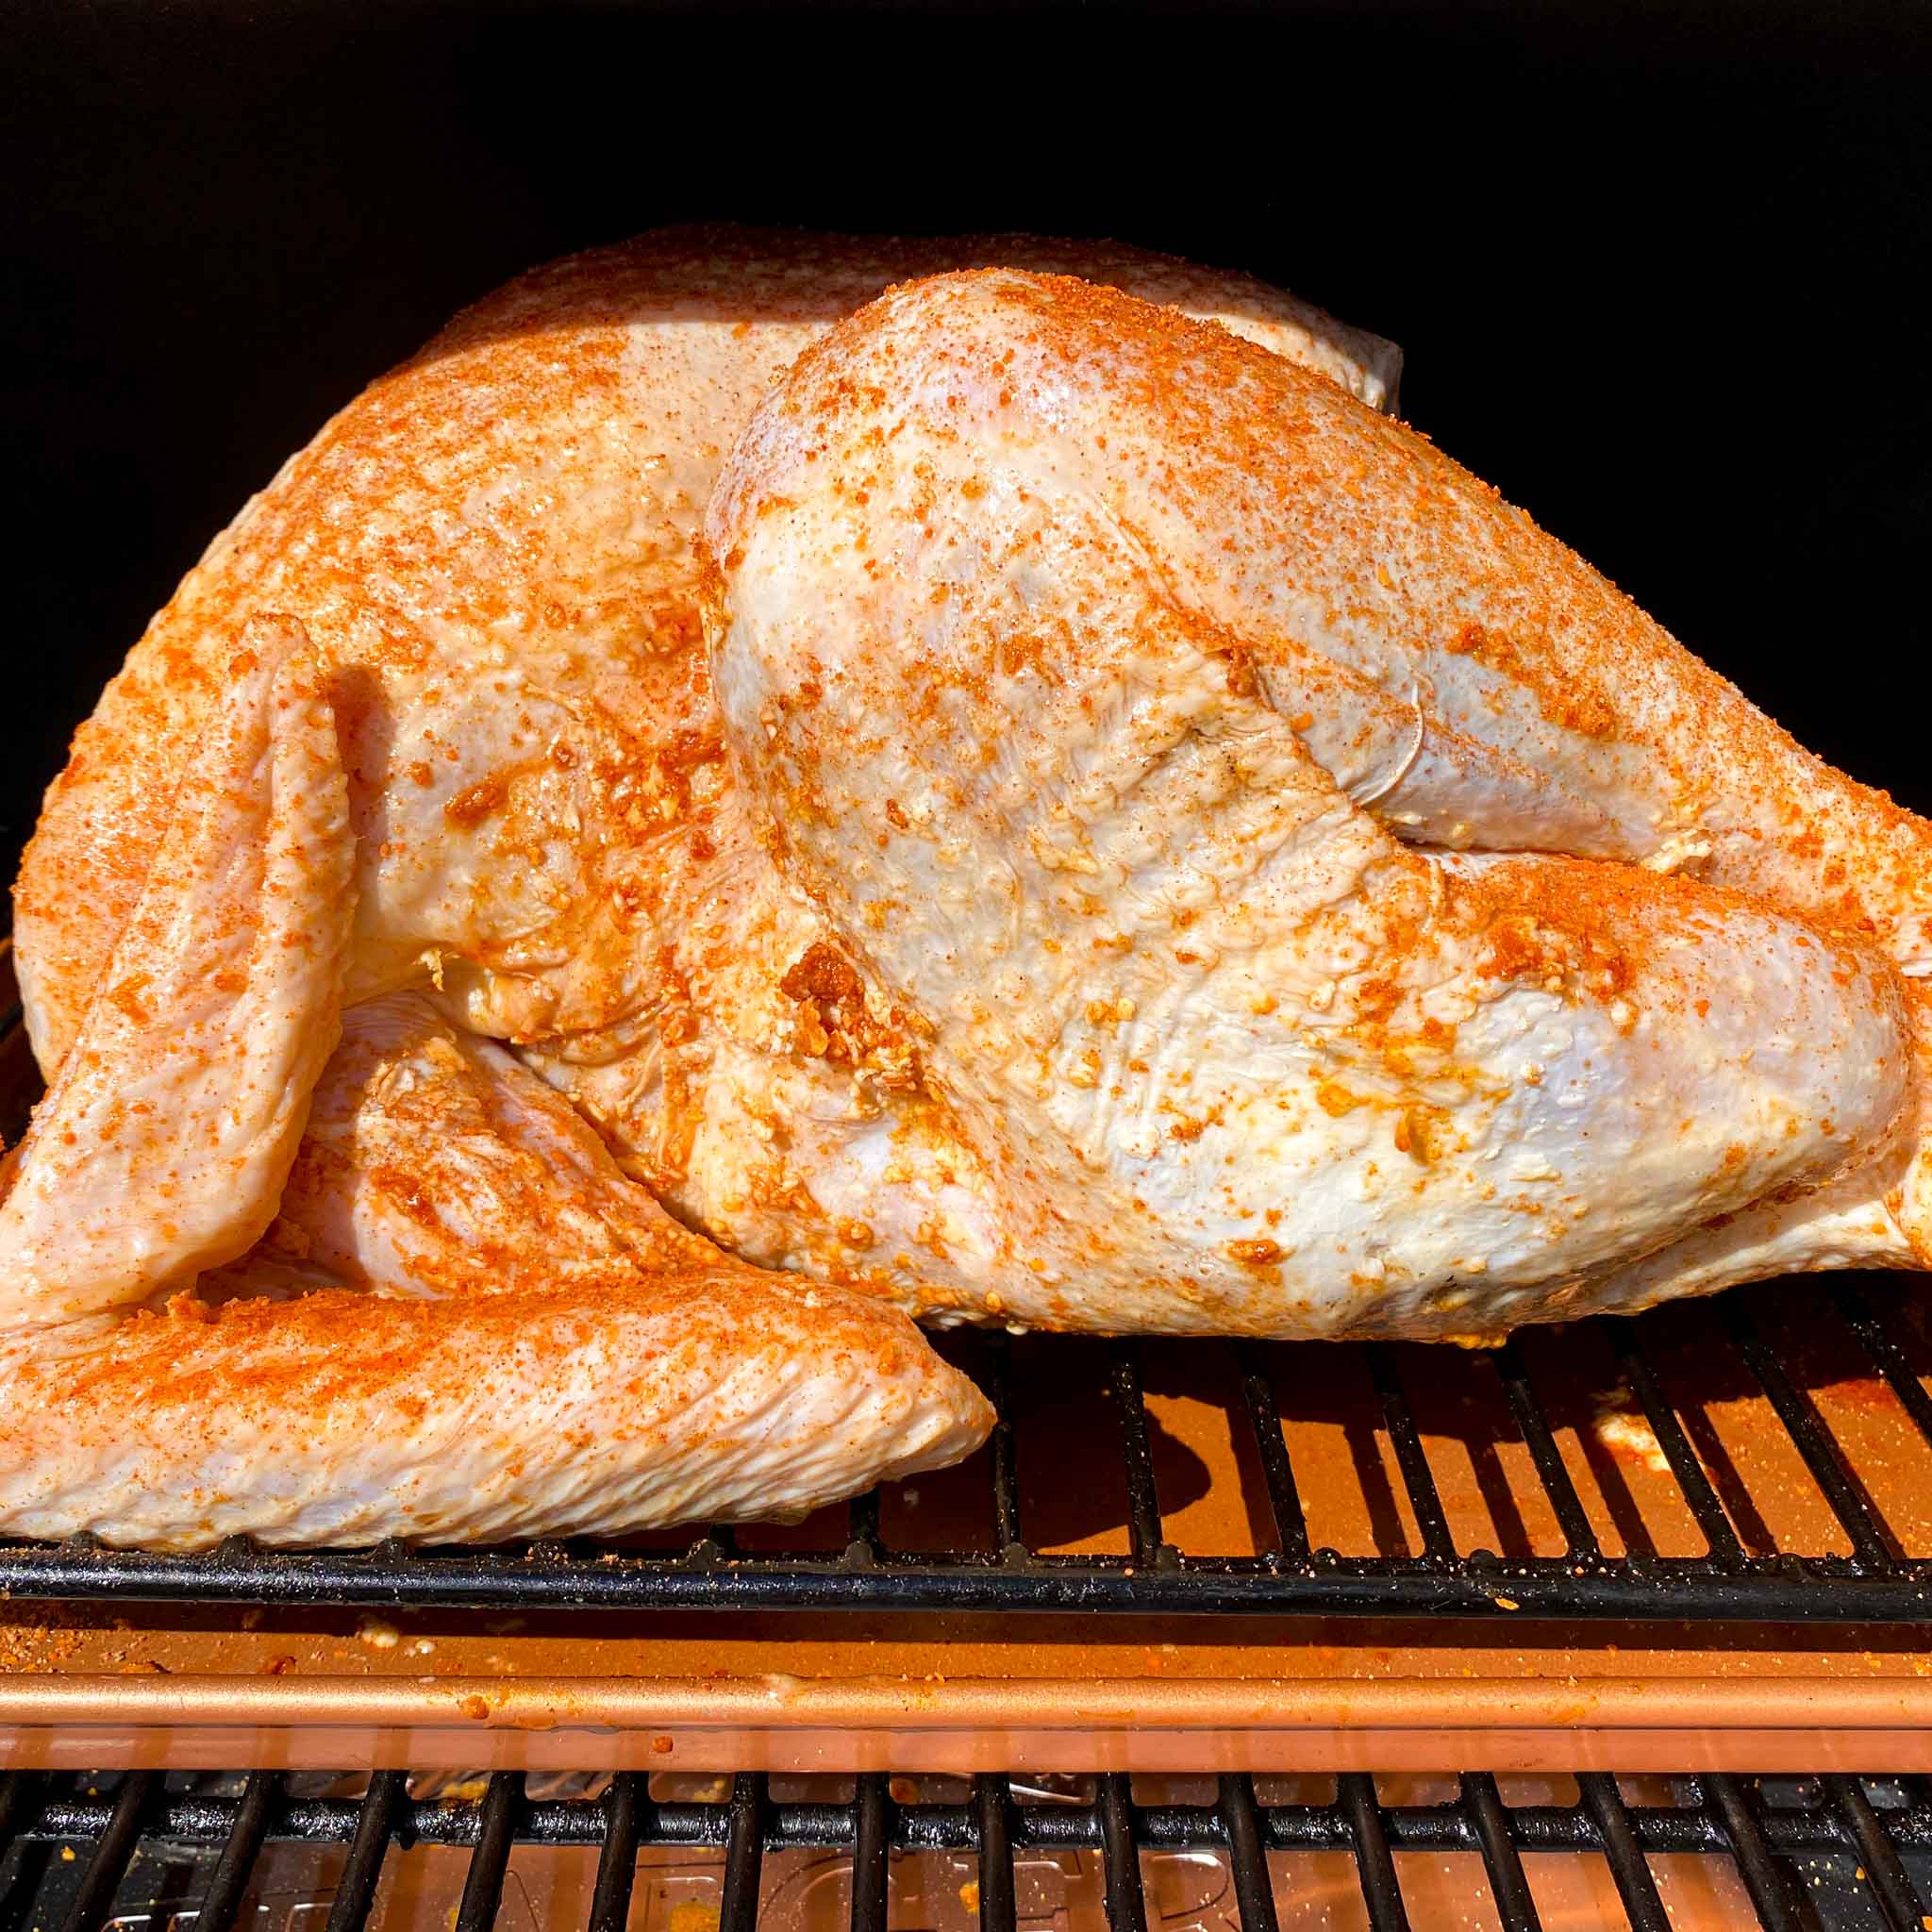 Raw seasoned turkey sitting on a traeger grill, ready to be smoked.